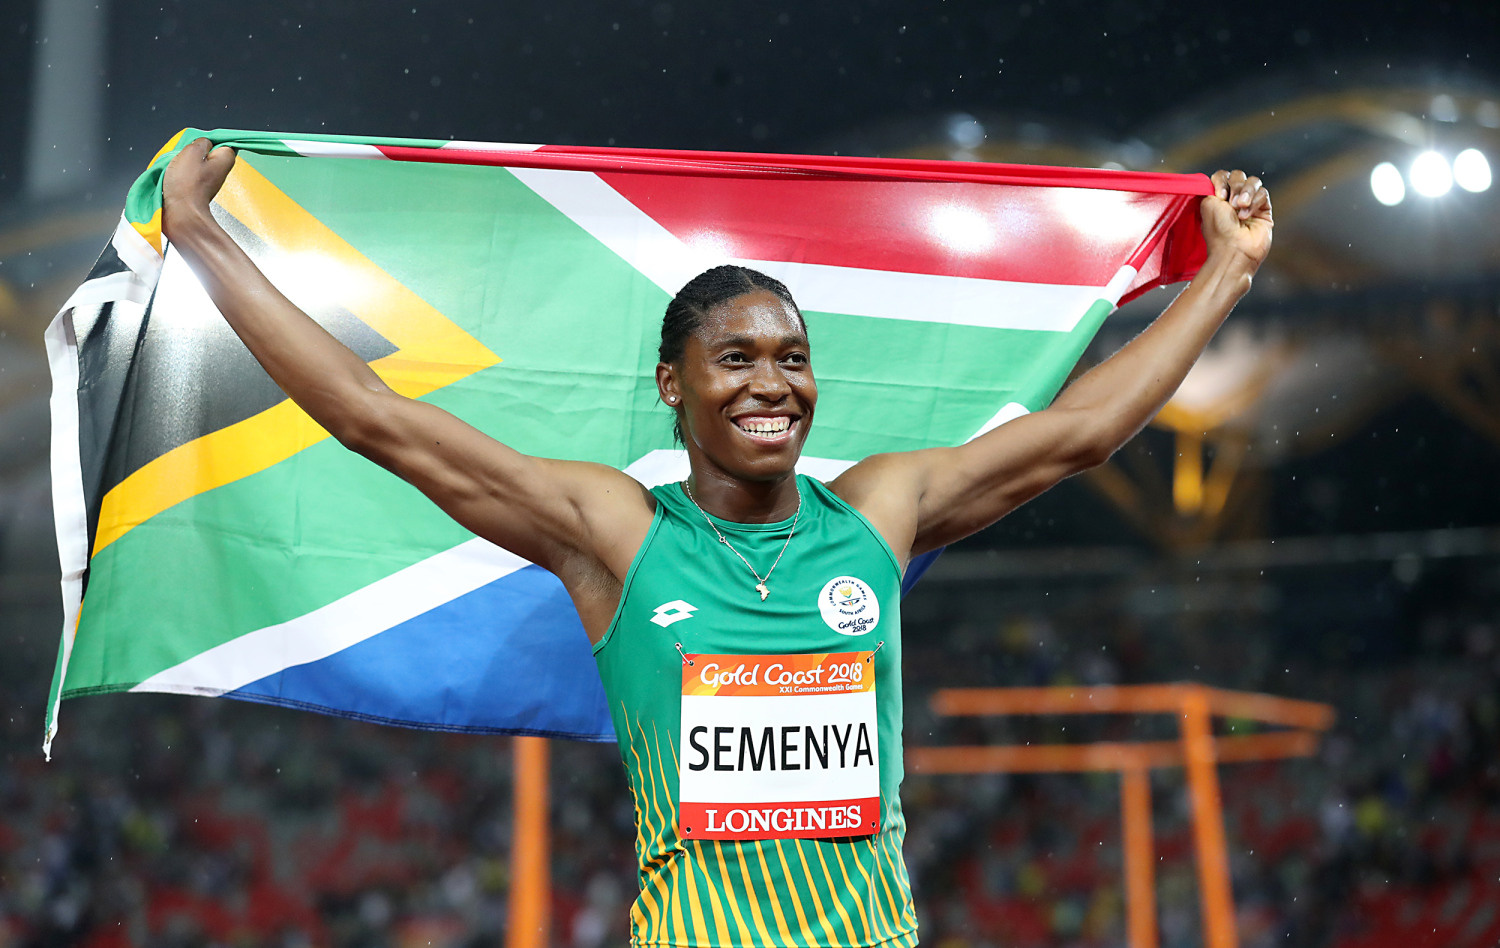 Caster Semenya: what her story says about gender and race in sports - Vox